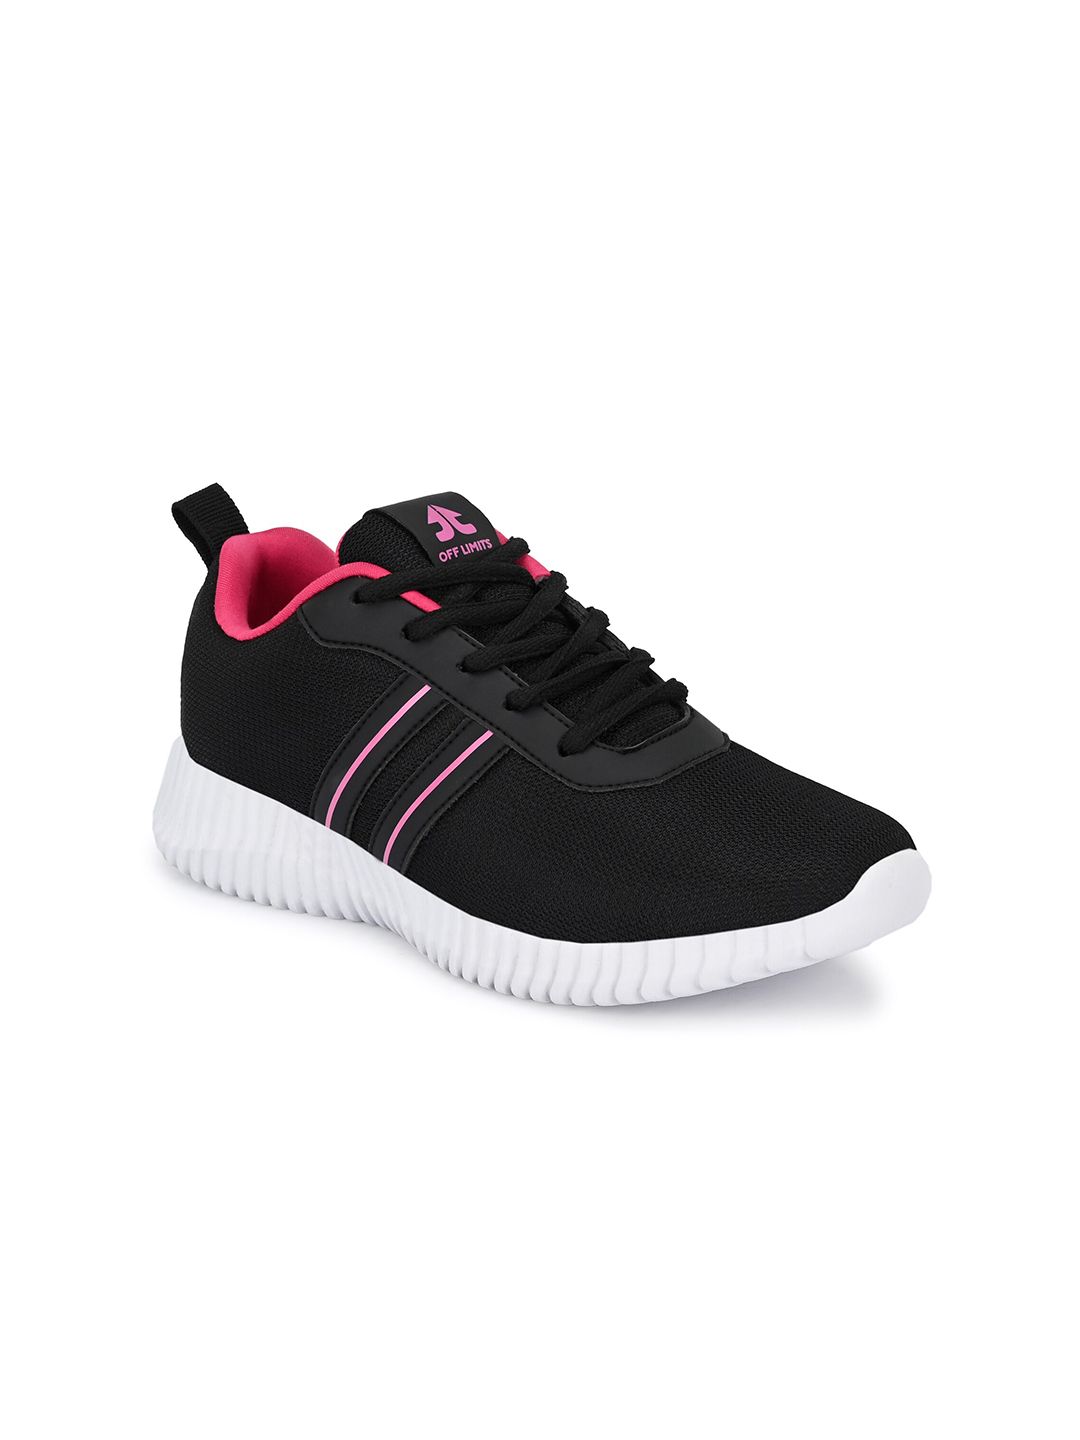 OFF LIMITS Women Black Mesh Running Non-Marking Shoes Price in India